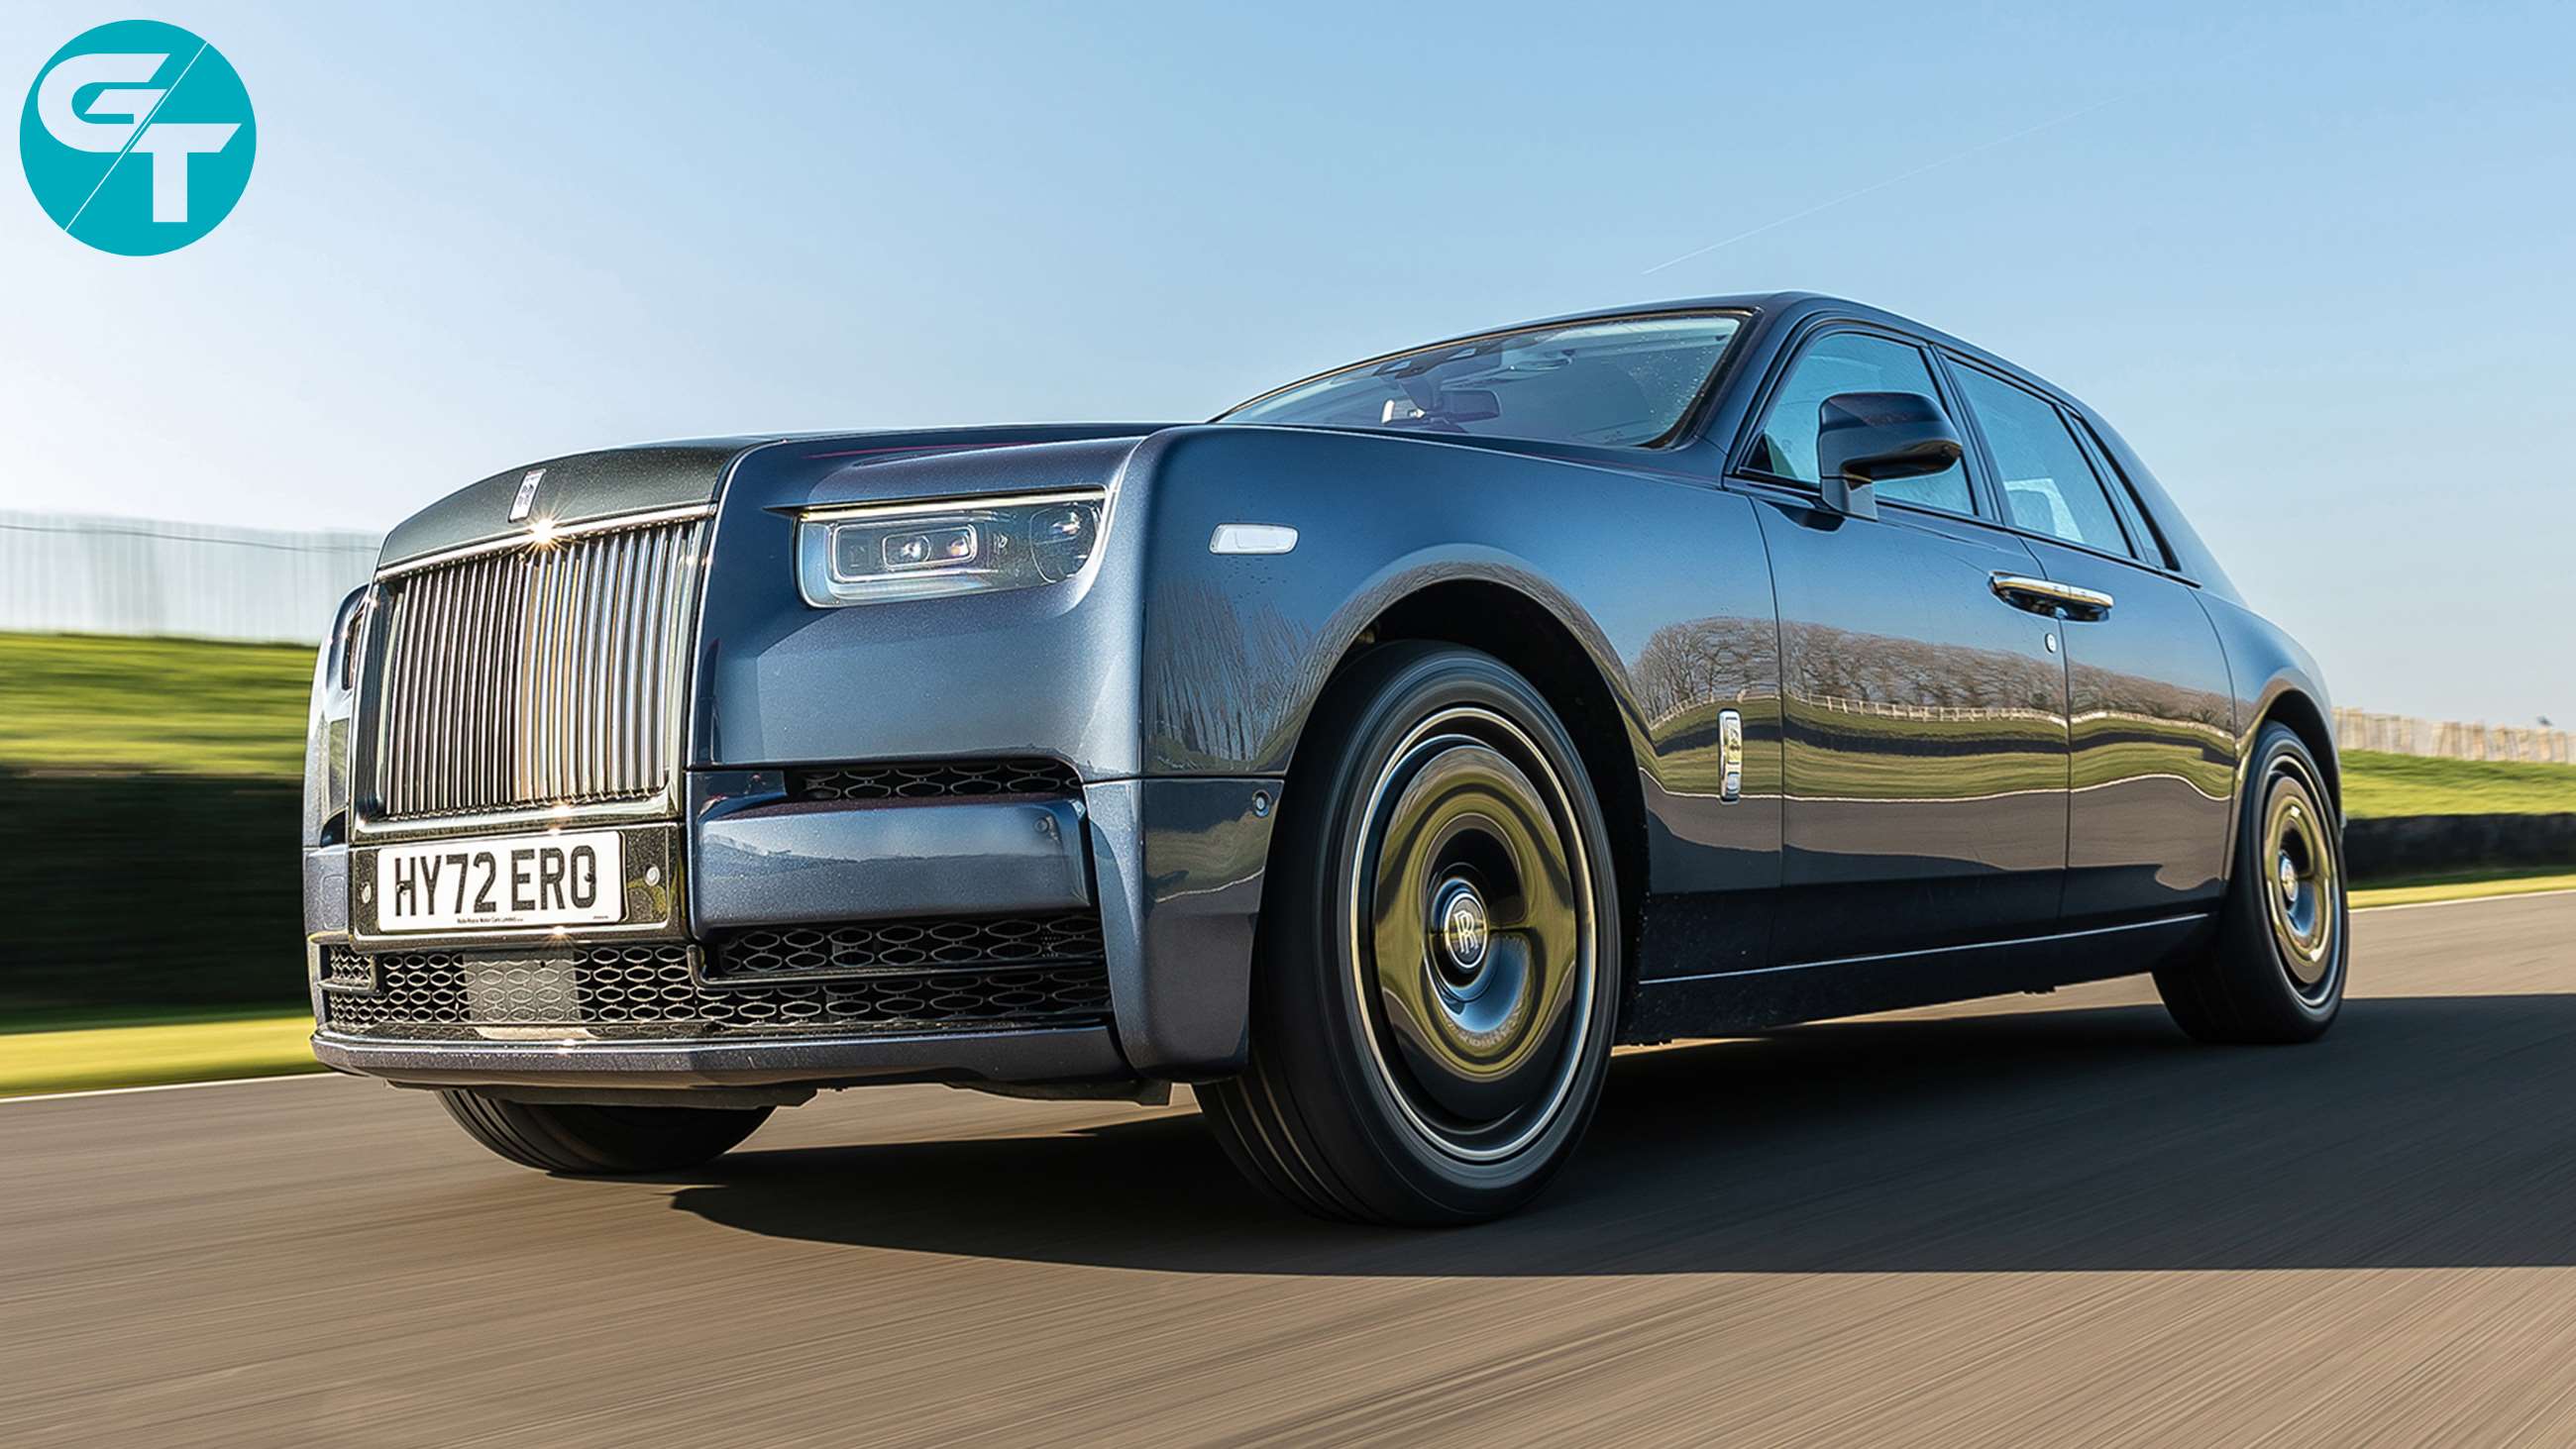 VIDEO: Check Top Gear's Rolls-Royce Ghost Review